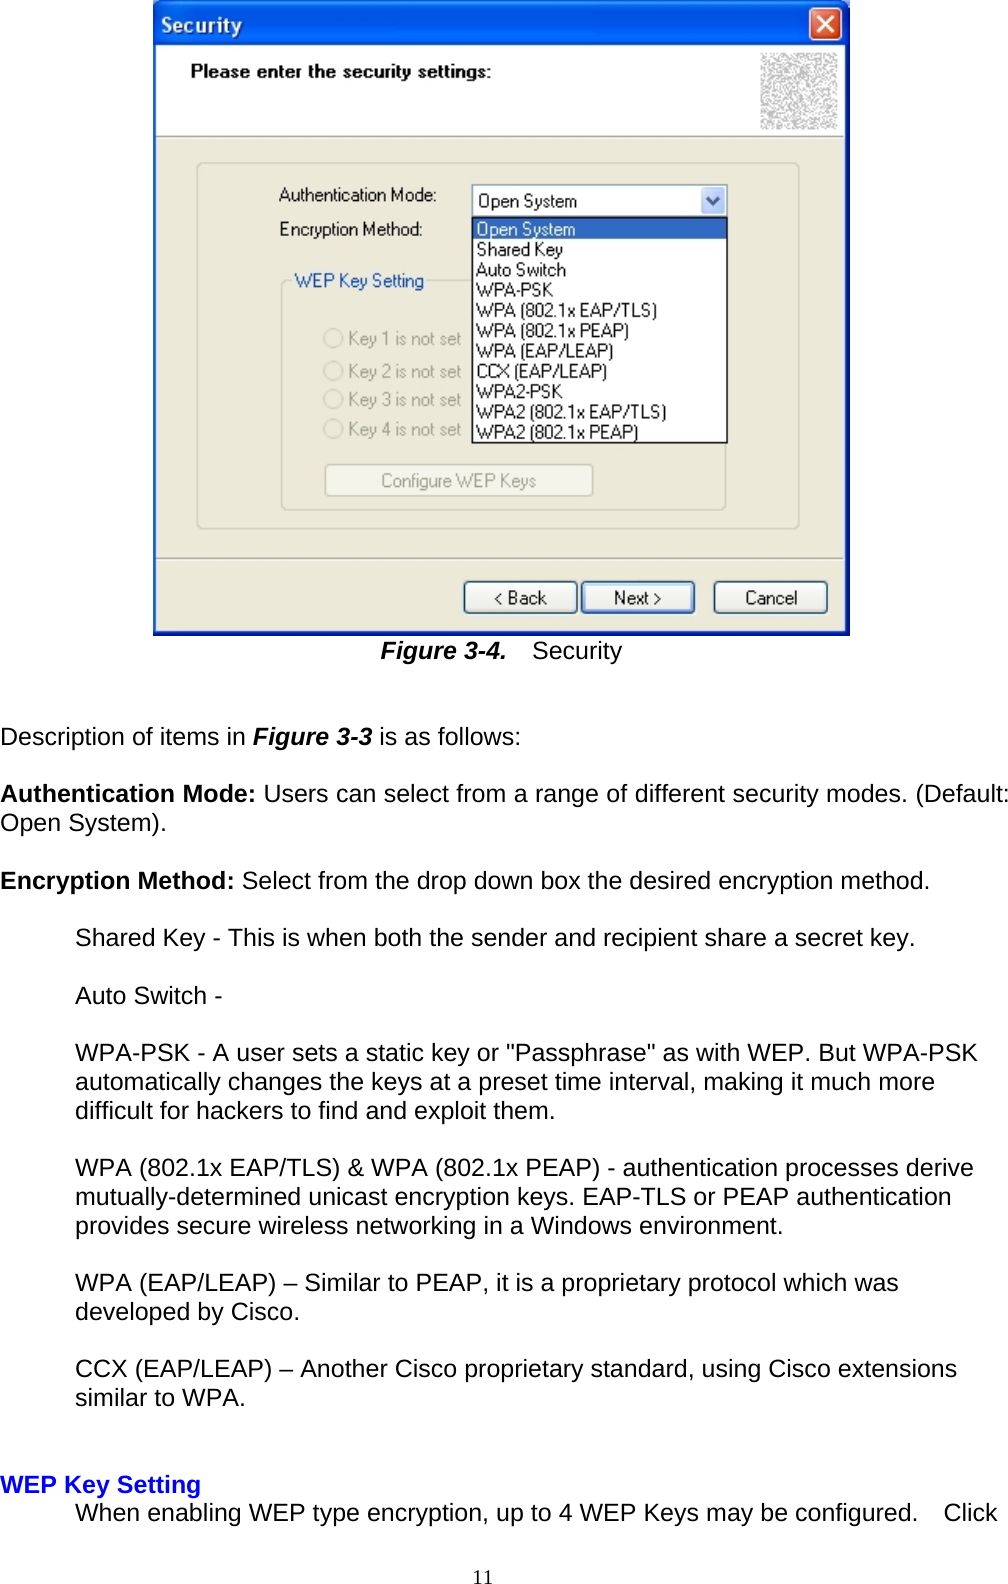  Figure 3-4.   Security   Description of items in Figure 3-3 is as follows:  Authentication Mode: Users can select from a range of different security modes. (Default: Open System).  Encryption Method: Select from the drop down box the desired encryption method.  Shared Key - This is when both the sender and recipient share a secret key.  Auto Switch -  WPA-PSK - A user sets a static key or &quot;Passphrase&quot; as with WEP. But WPA-PSK automatically changes the keys at a preset time interval, making it much more difficult for hackers to find and exploit them.  WPA (802.1x EAP/TLS) &amp; WPA (802.1x PEAP) - authentication processes derive mutually-determined unicast encryption keys. EAP-TLS or PEAP authentication   provides secure wireless networking in a Windows environment.  WPA (EAP/LEAP) – Similar to PEAP, it is a proprietary protocol which was developed by Cisco.  CCX (EAP/LEAP) – Another Cisco proprietary standard, using Cisco extensions similar to WPA.   WEP Key Setting  When enabling WEP type encryption, up to 4 WEP Keys may be configured.    Click 11   